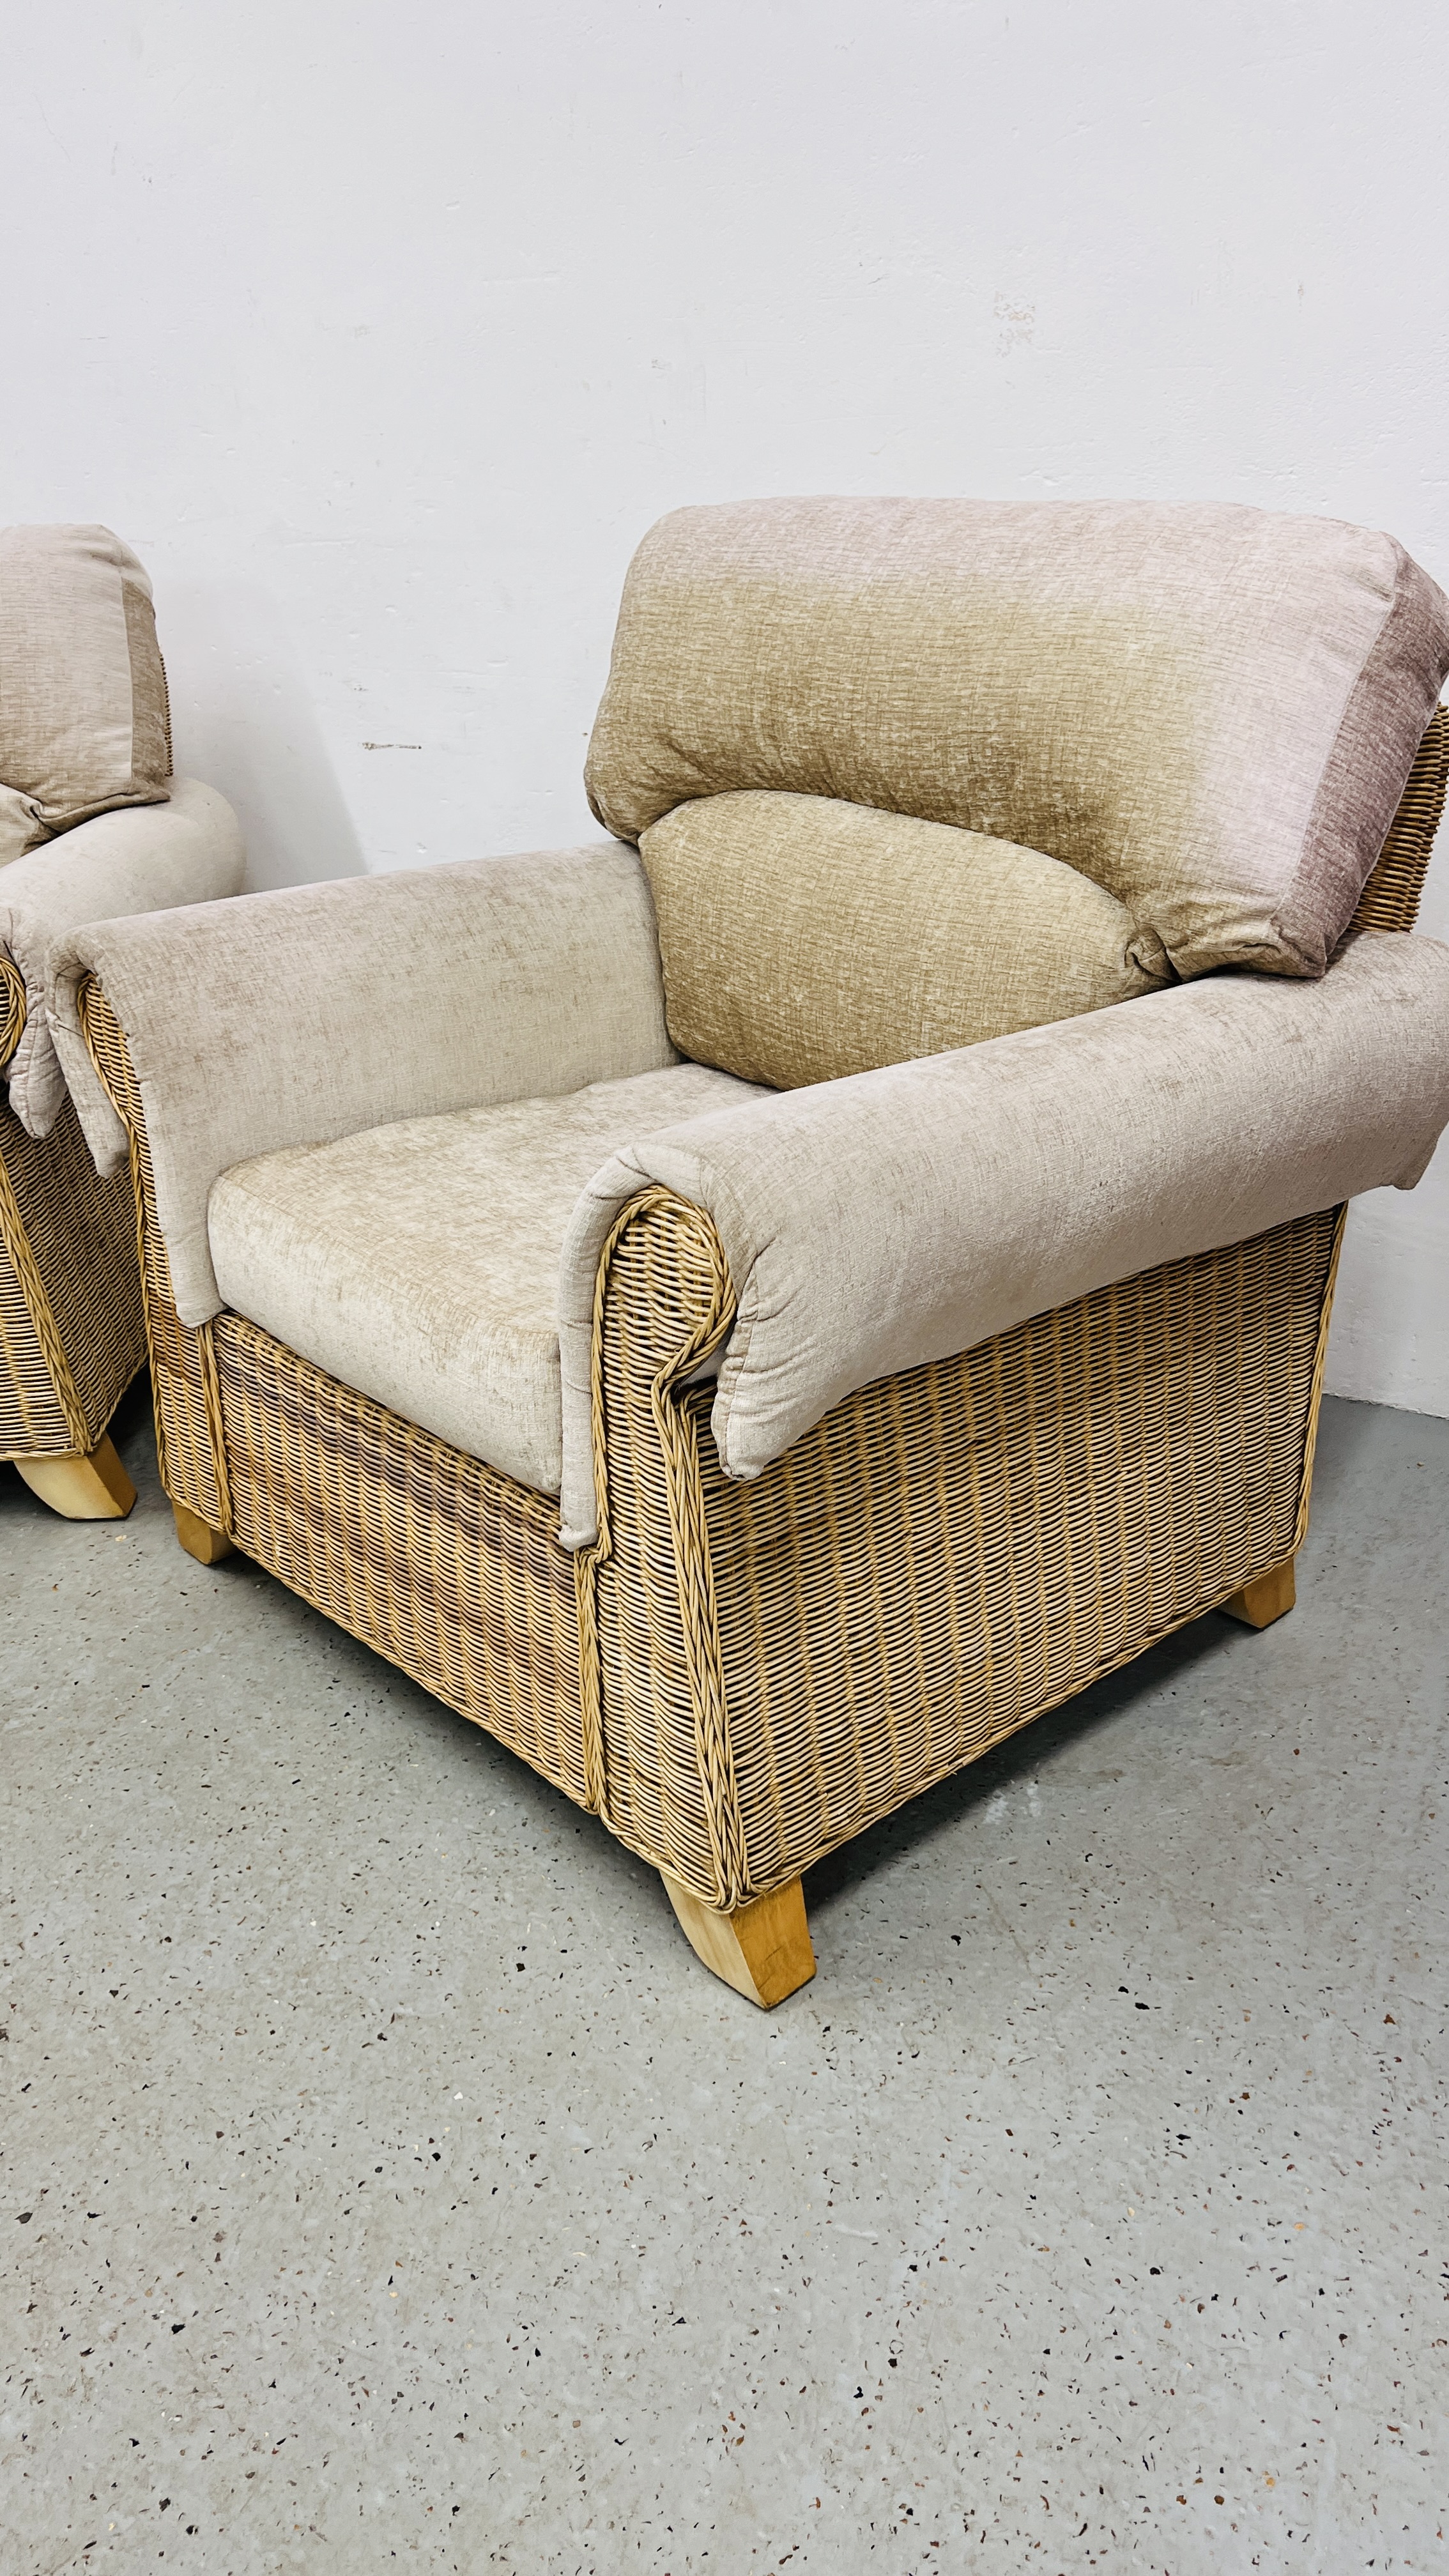 GOOD QUALITY FOUR PIECE CANE CONSERVATORY SUITE COMPRISING TWO ARMCHAIRS AND TWO SEATER SOFA AND - Image 3 of 15